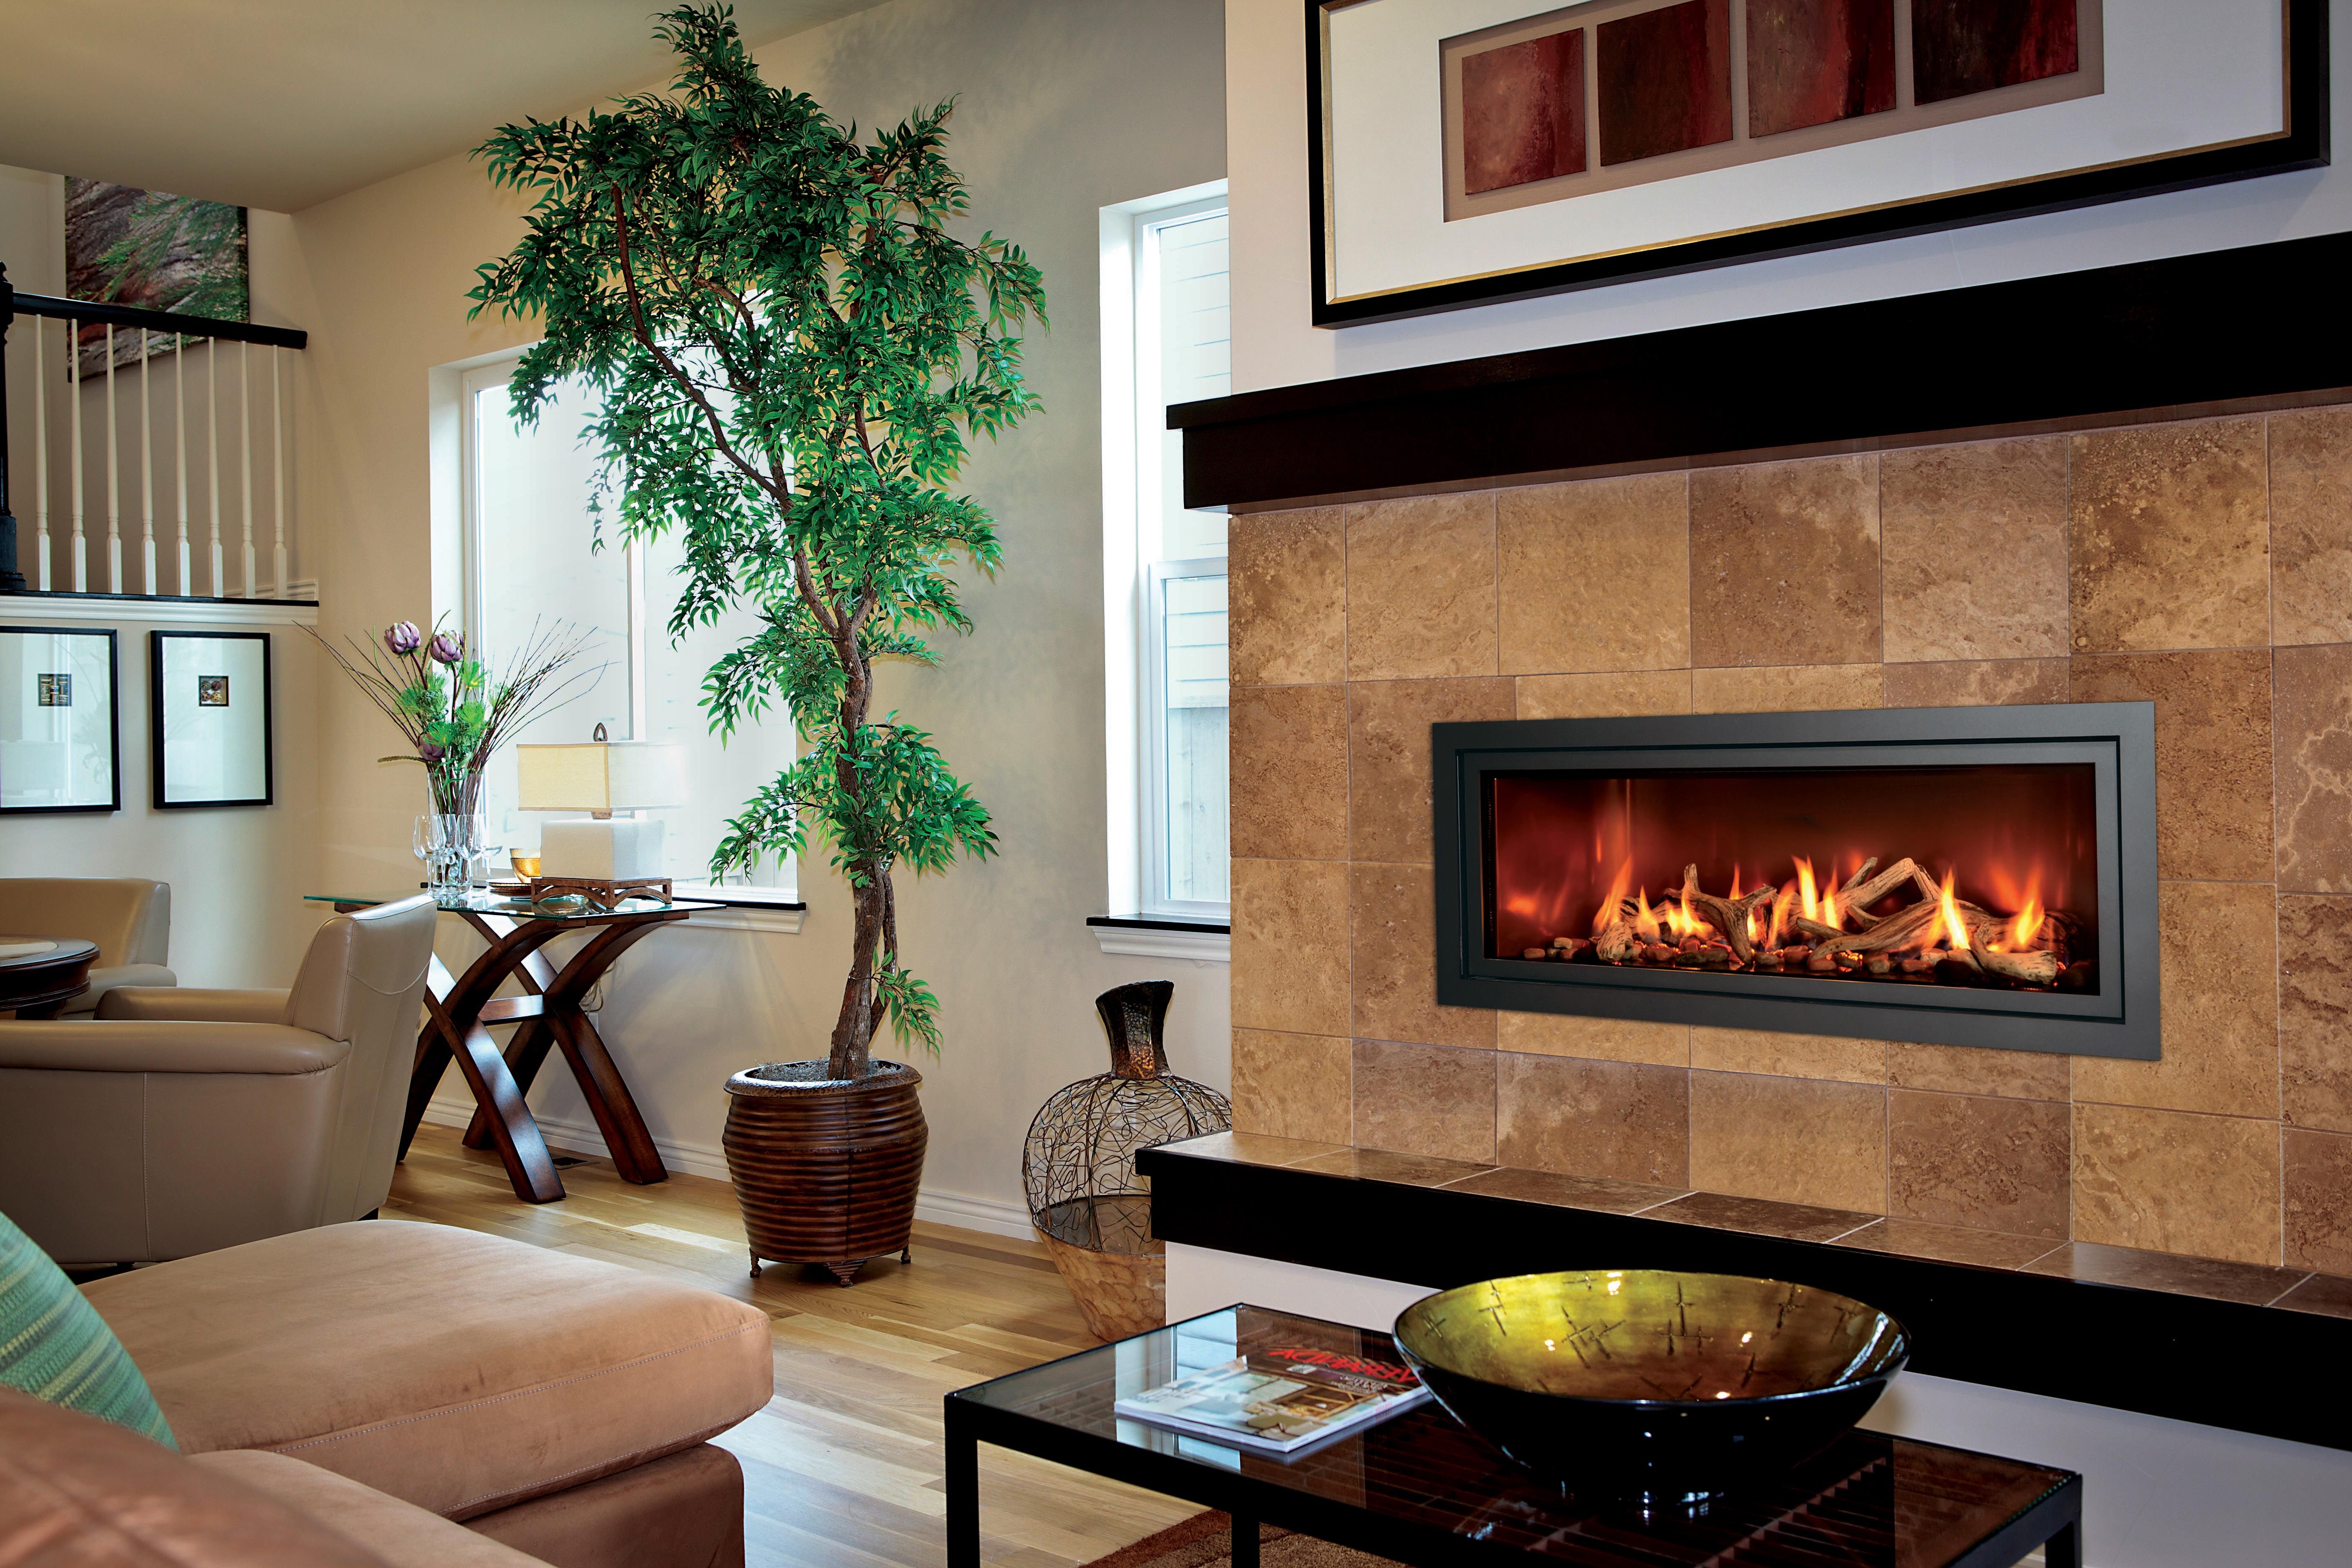 Napoleon Fireplace Reviews Fresh Just because "modern" is In the Name Doesn T Mean the